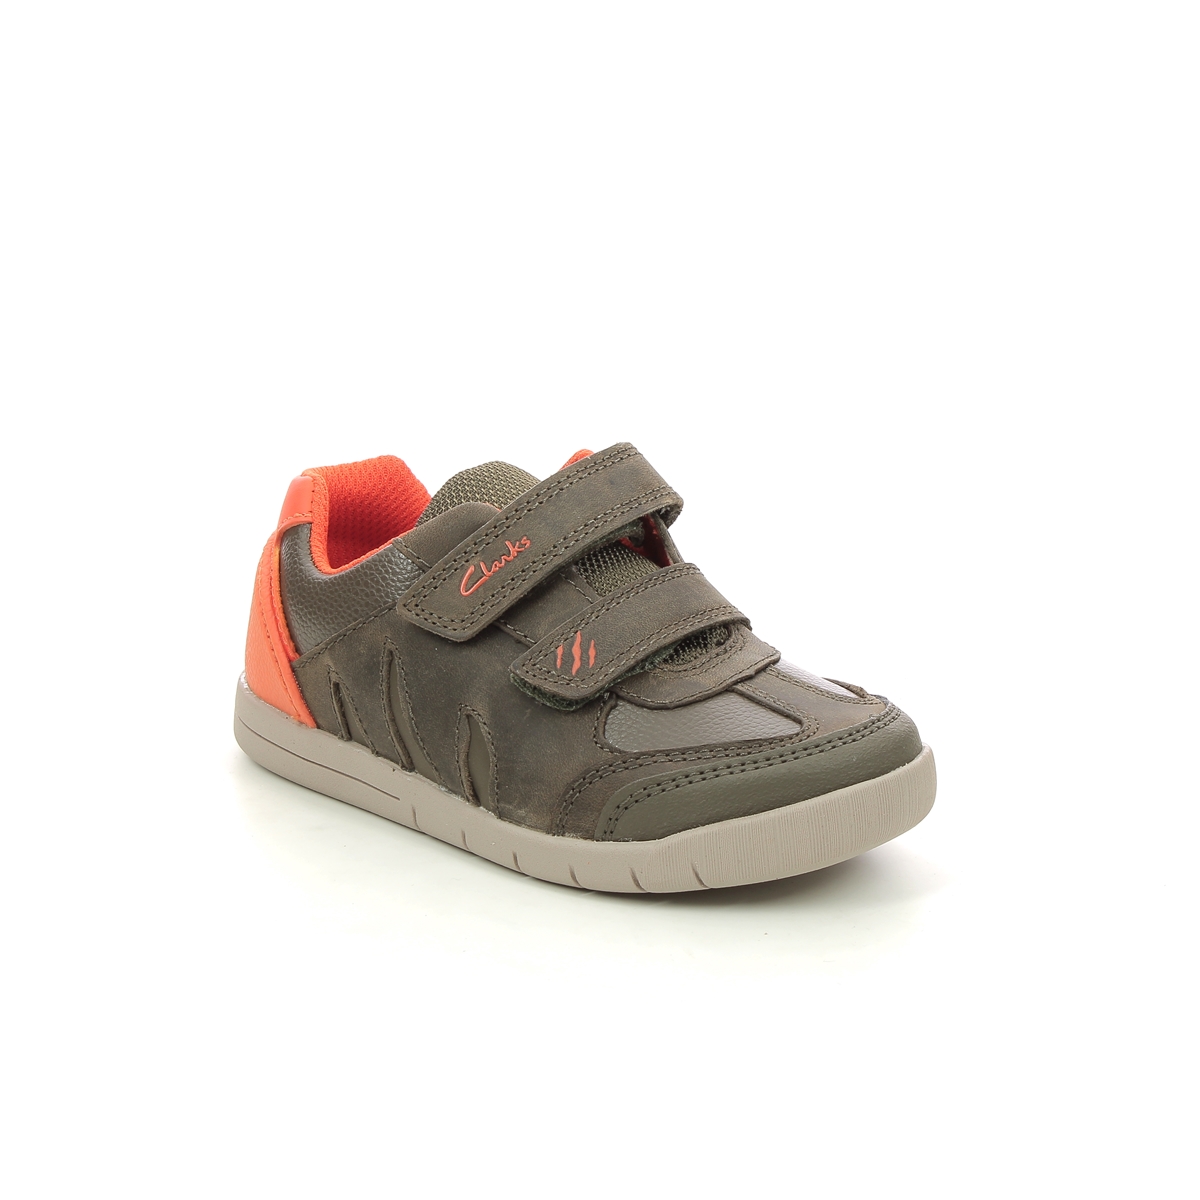 Clarks Rex Play Quest Khaki Leather Kids Boys Toddler Shoes 6228-16F in a Plain Leather in Size 4.5